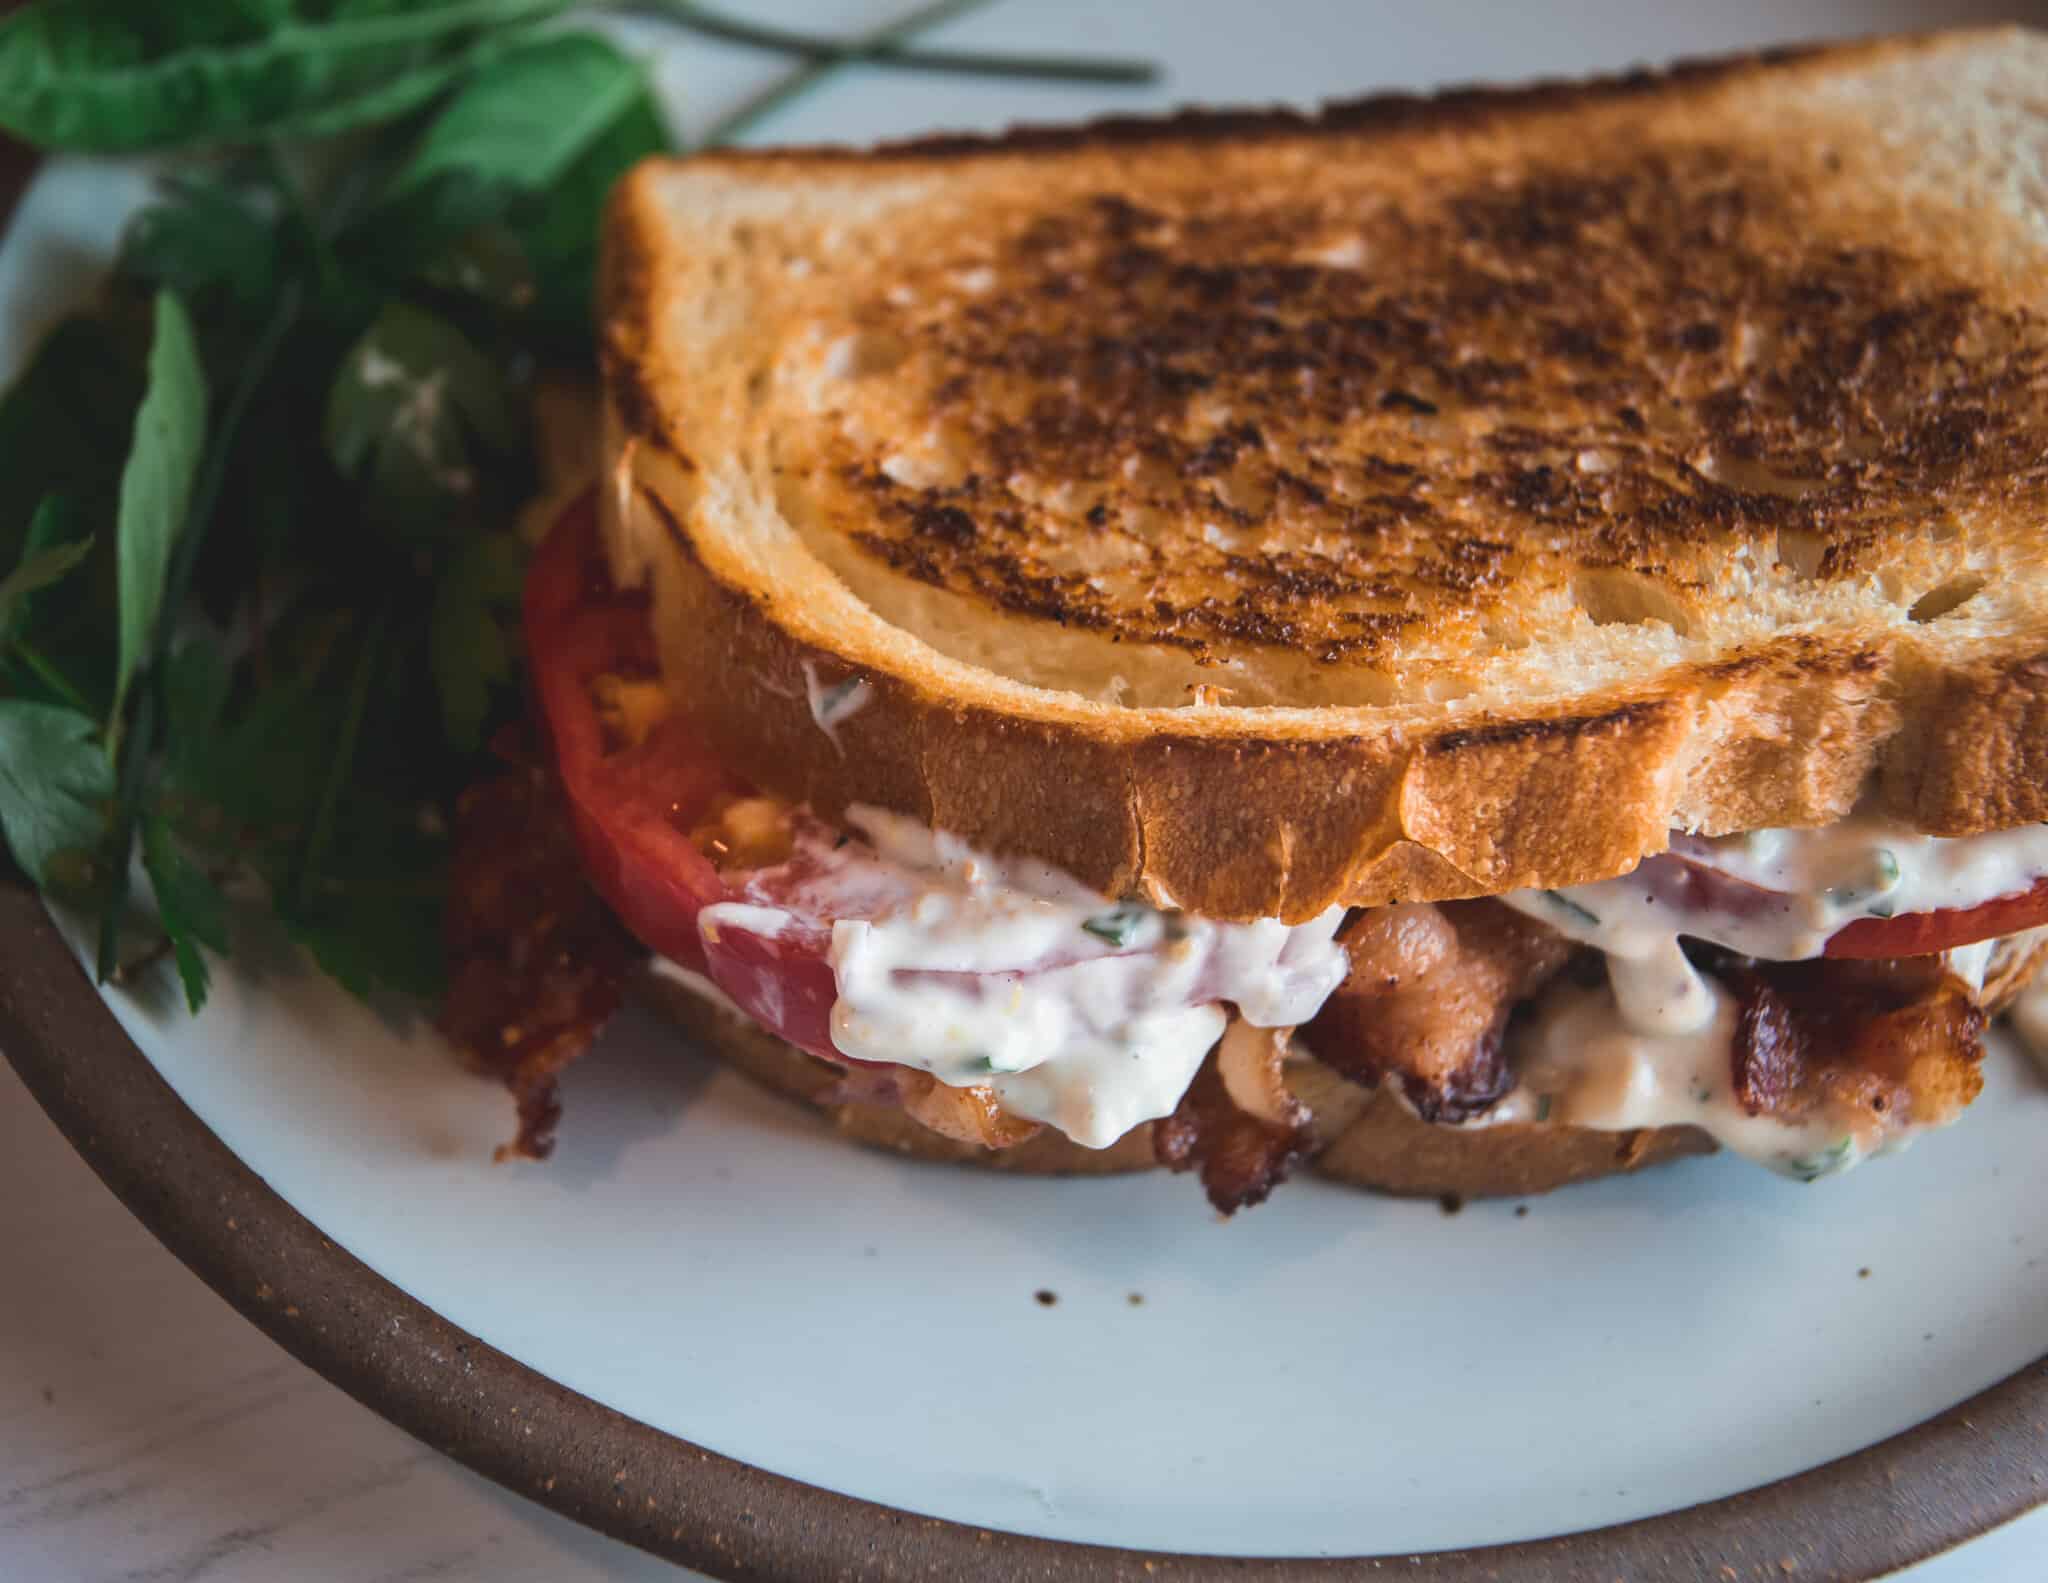 tomatoes, bacon and aioli sandwiched between toasted bread on a plate